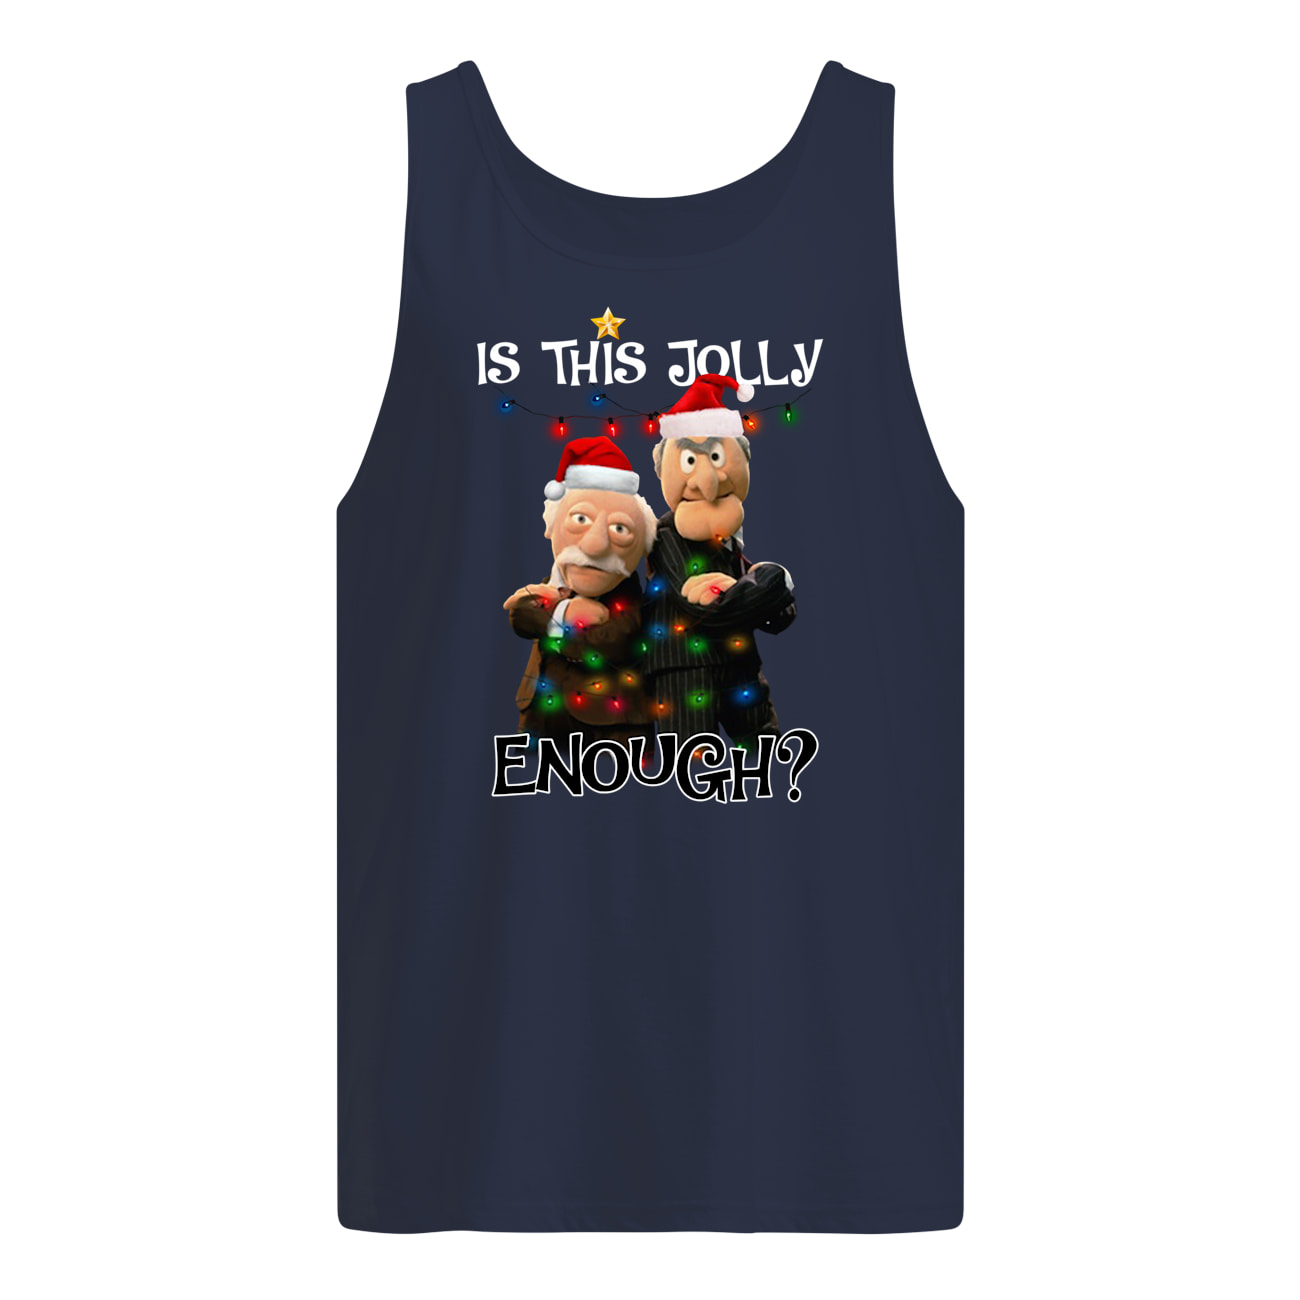 The muppets is this jolly enough christmas tank top